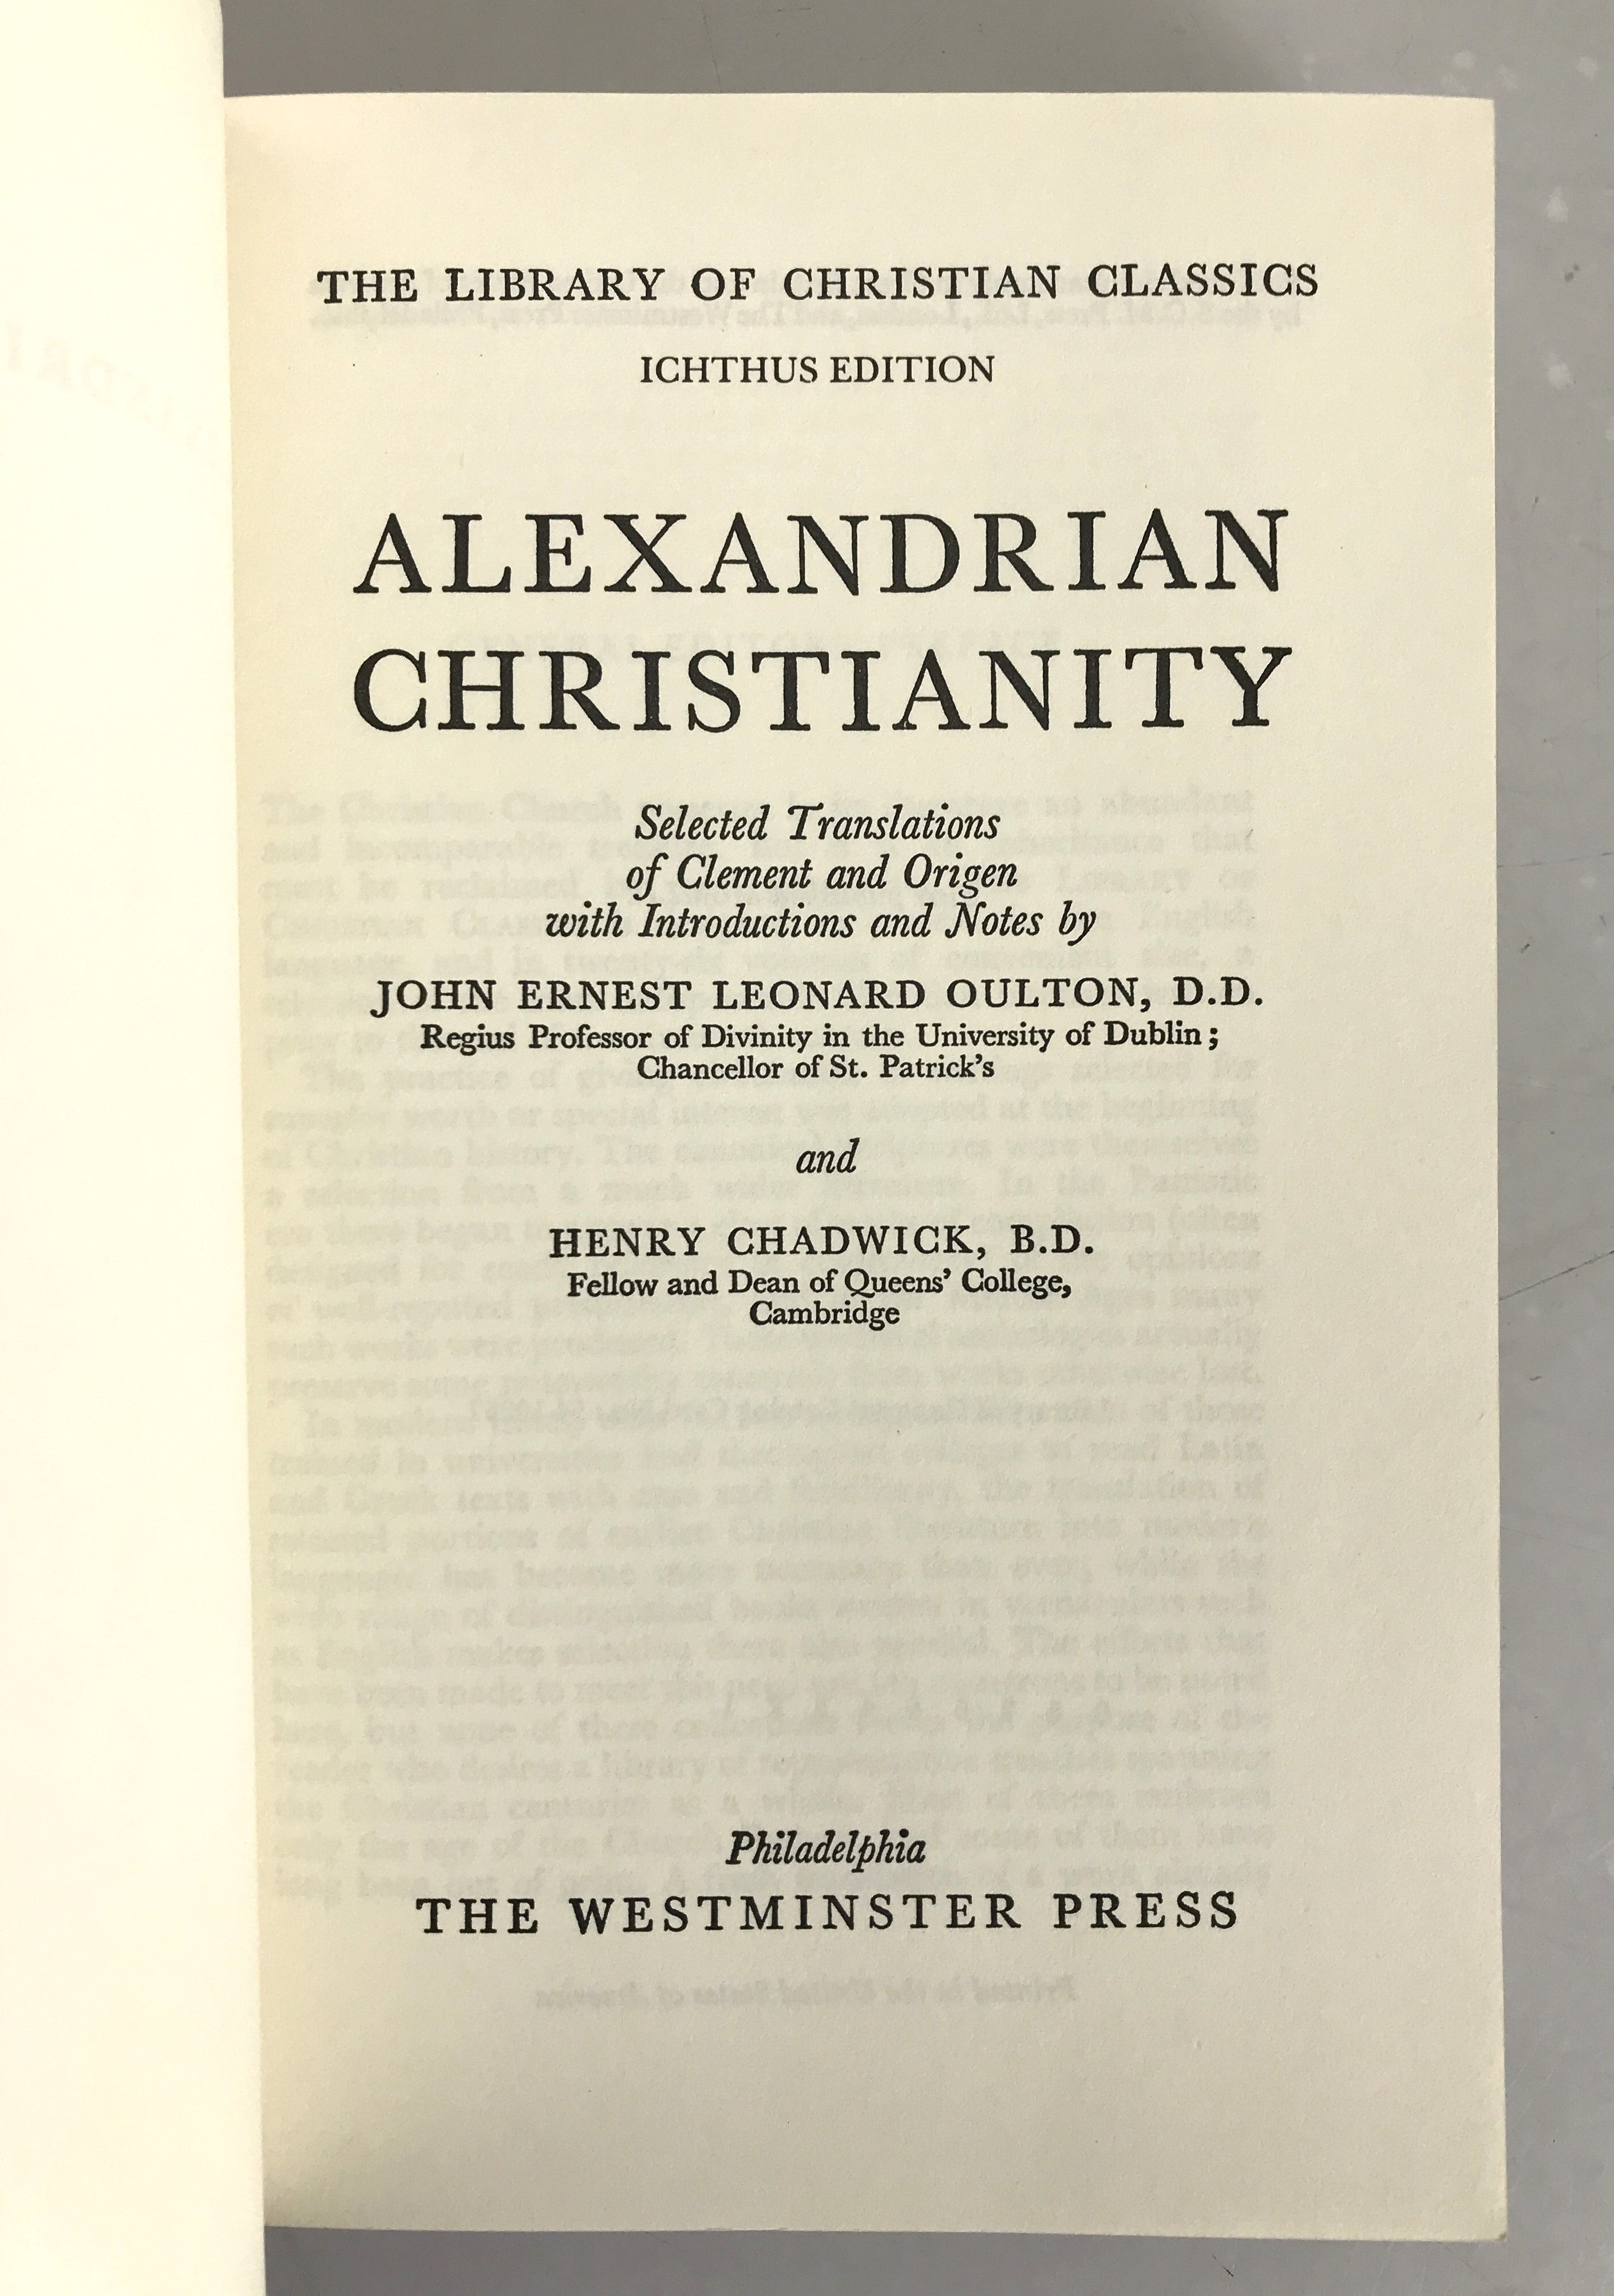 Alexandrian Christianity by Henry Chadwick First Edition 1954 SC - Icthus Edition